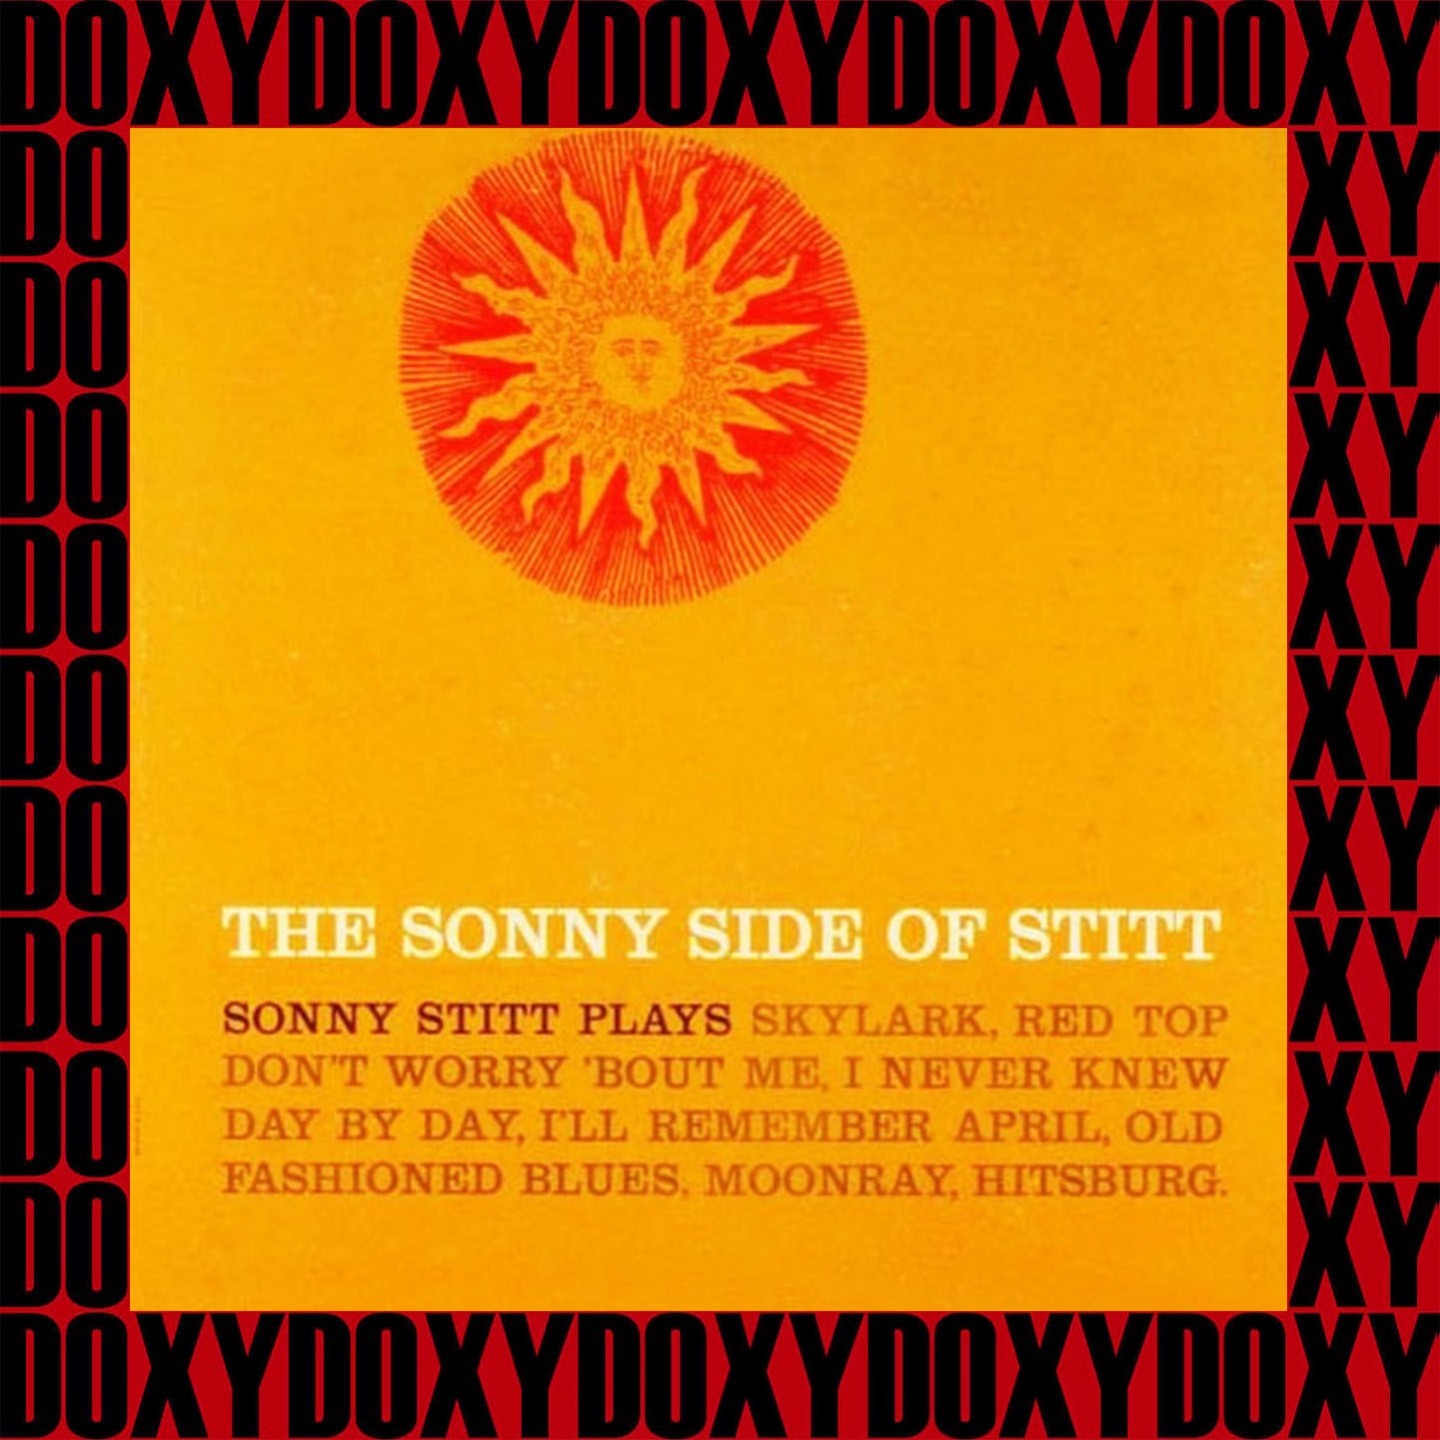 The Sonny Side Of Stitt (Remastered Version) (Doxy Collection)